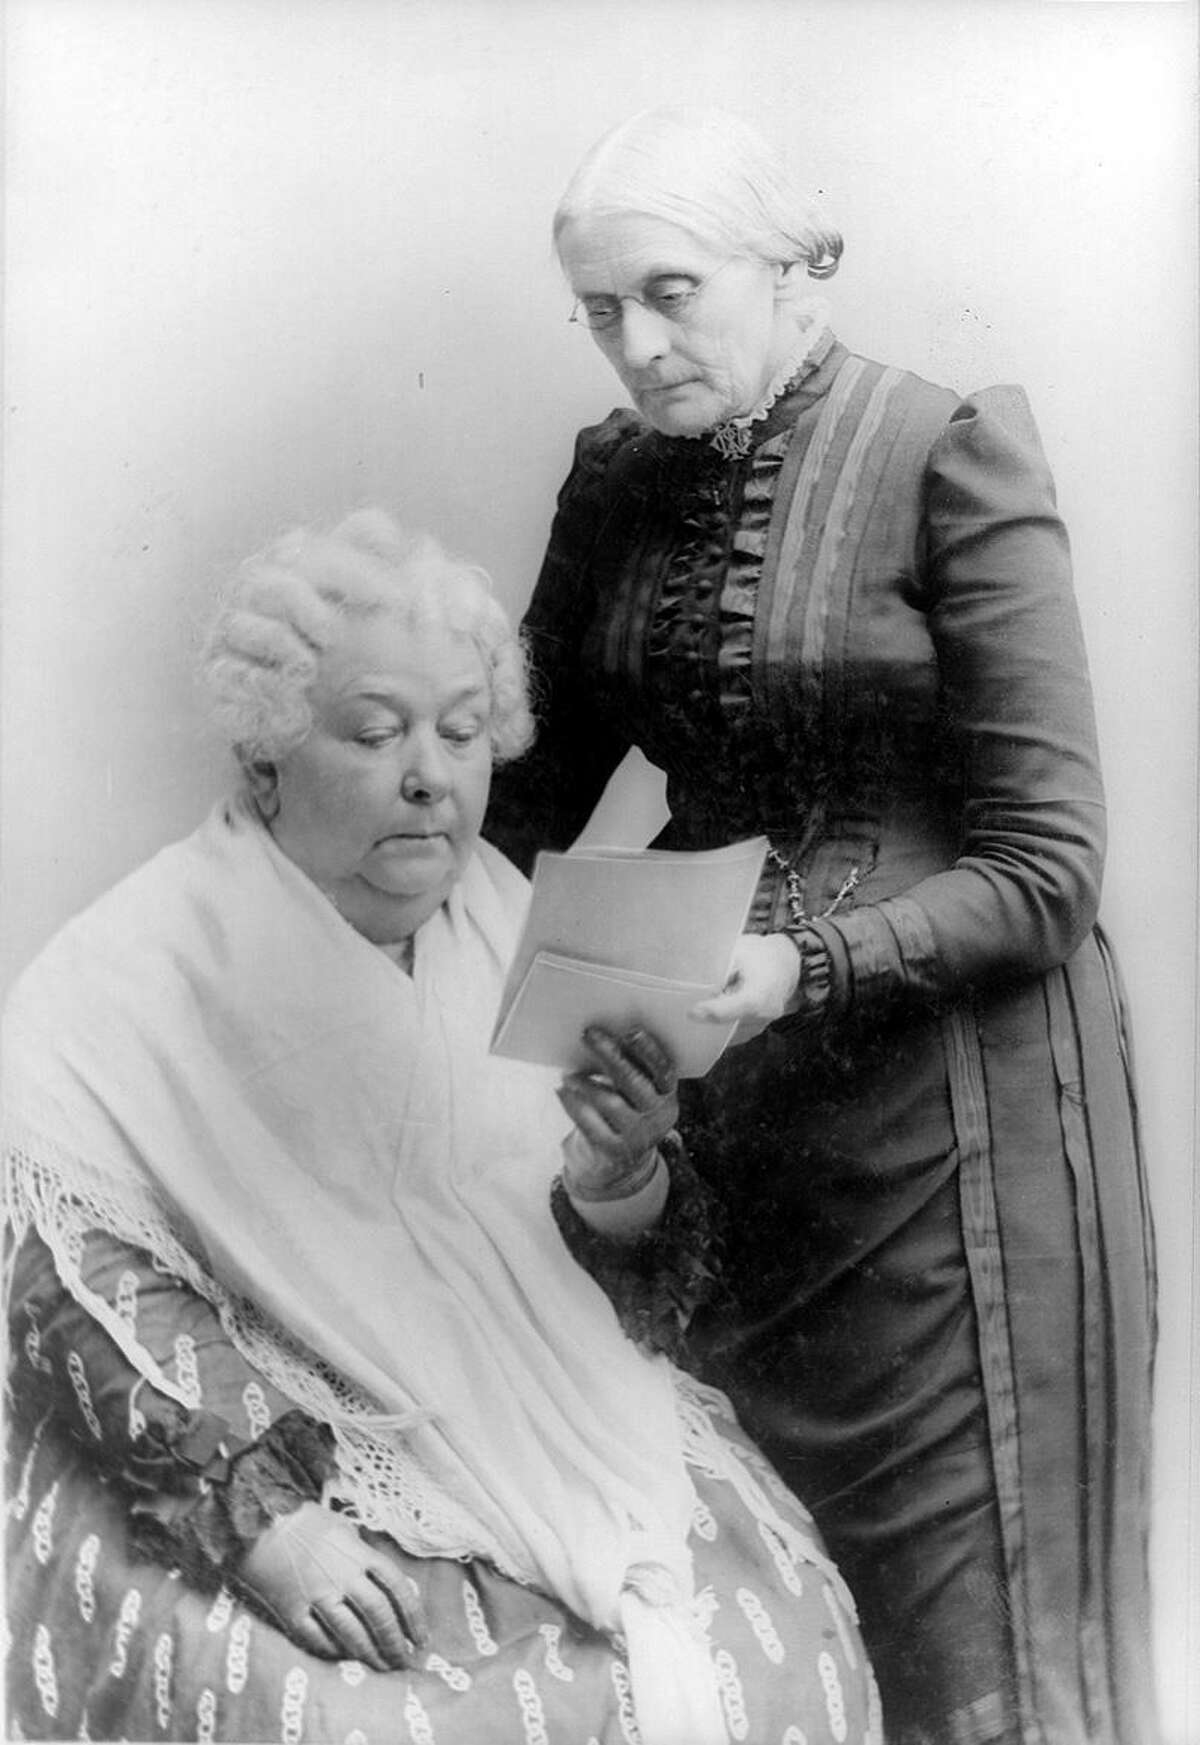 Elizabeth Cady Stanton, seated, and Susan B. Anthony, standing, both attended the first Women's Rights convention held in Seneca Falls, New York, in July of 1848. Seen here, photographed together, sometime between 1880 and 1902.